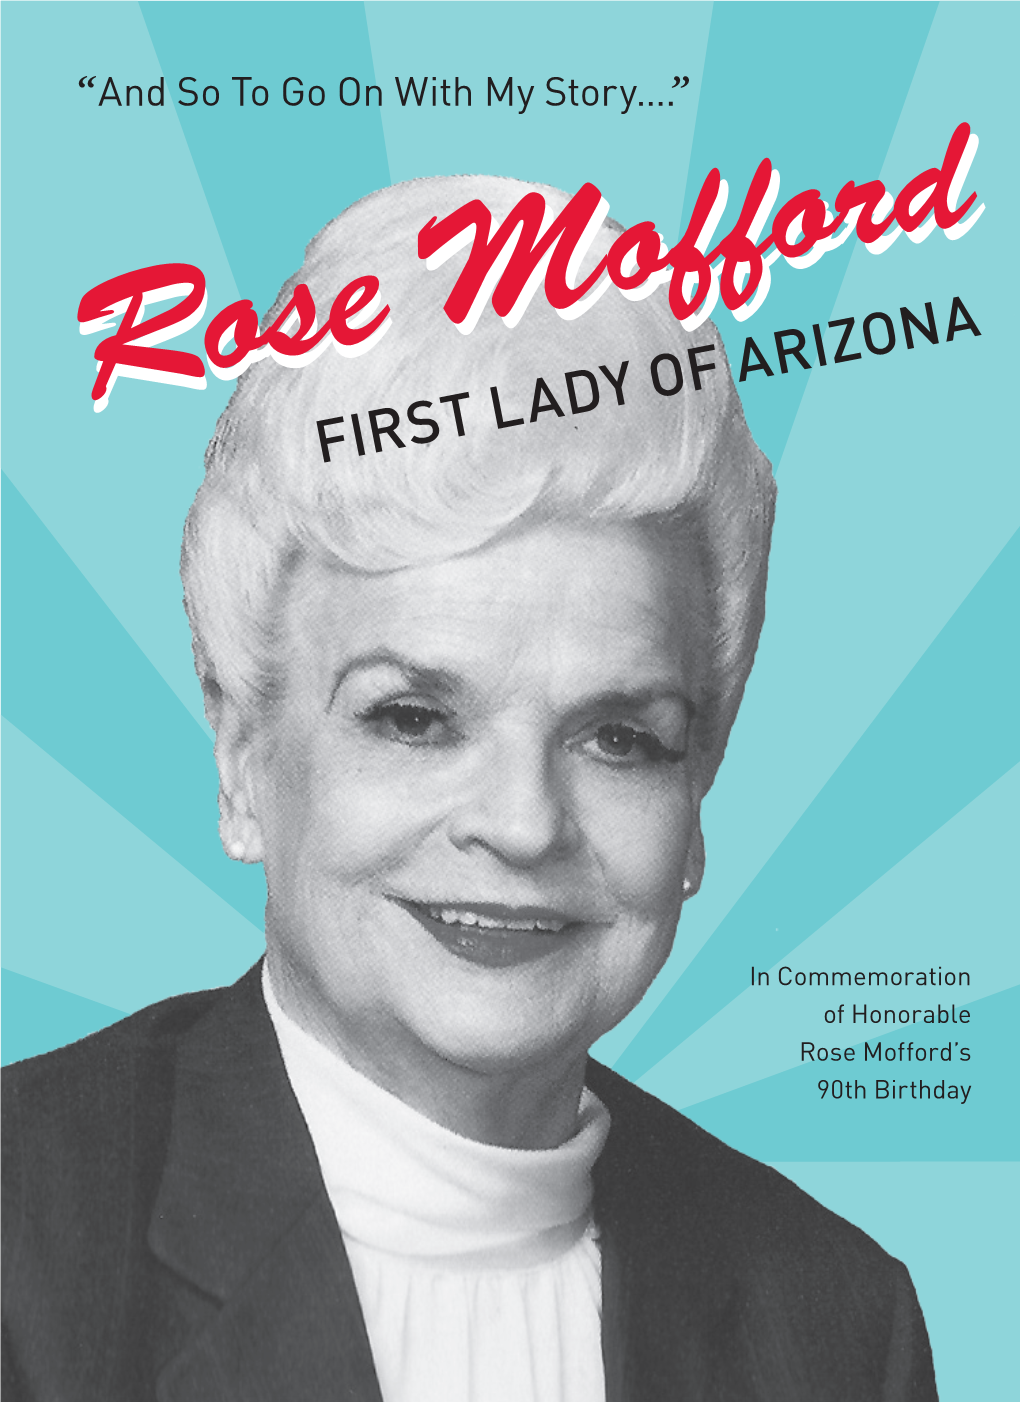 Rose Mofford, First Lady of Arizona